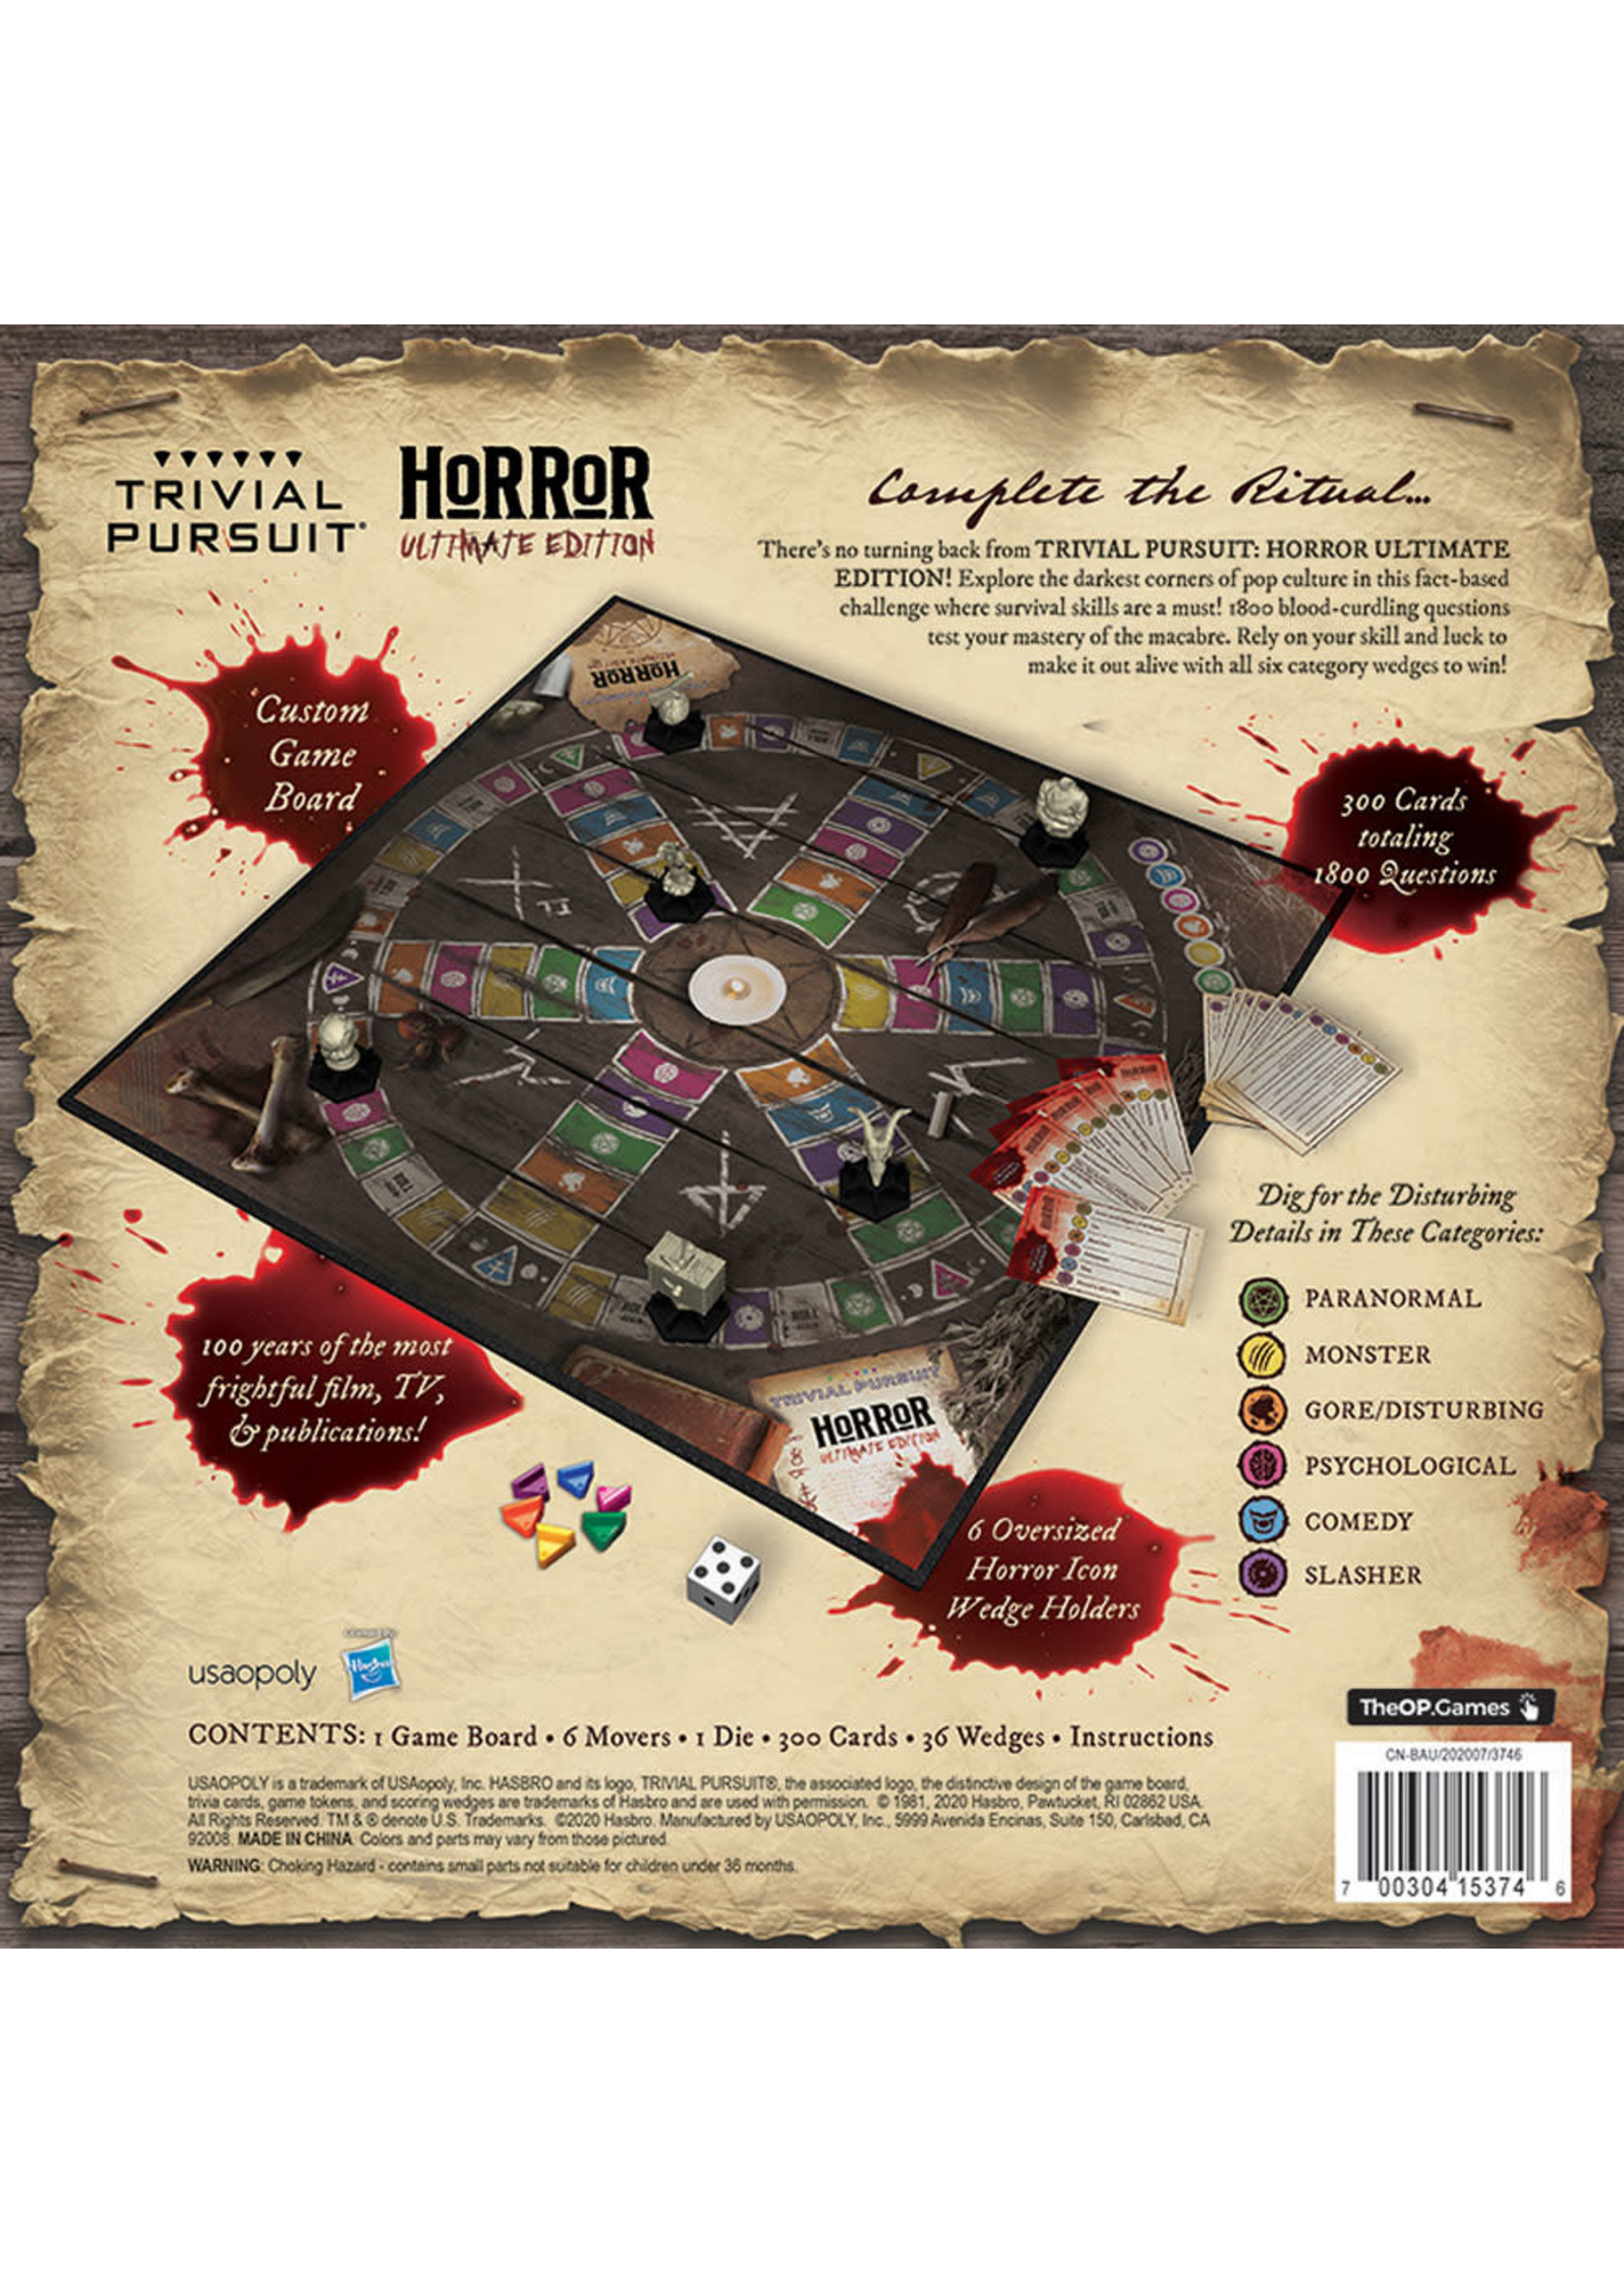 Usaopoly Trivial Pursuit: Horror Ultimate